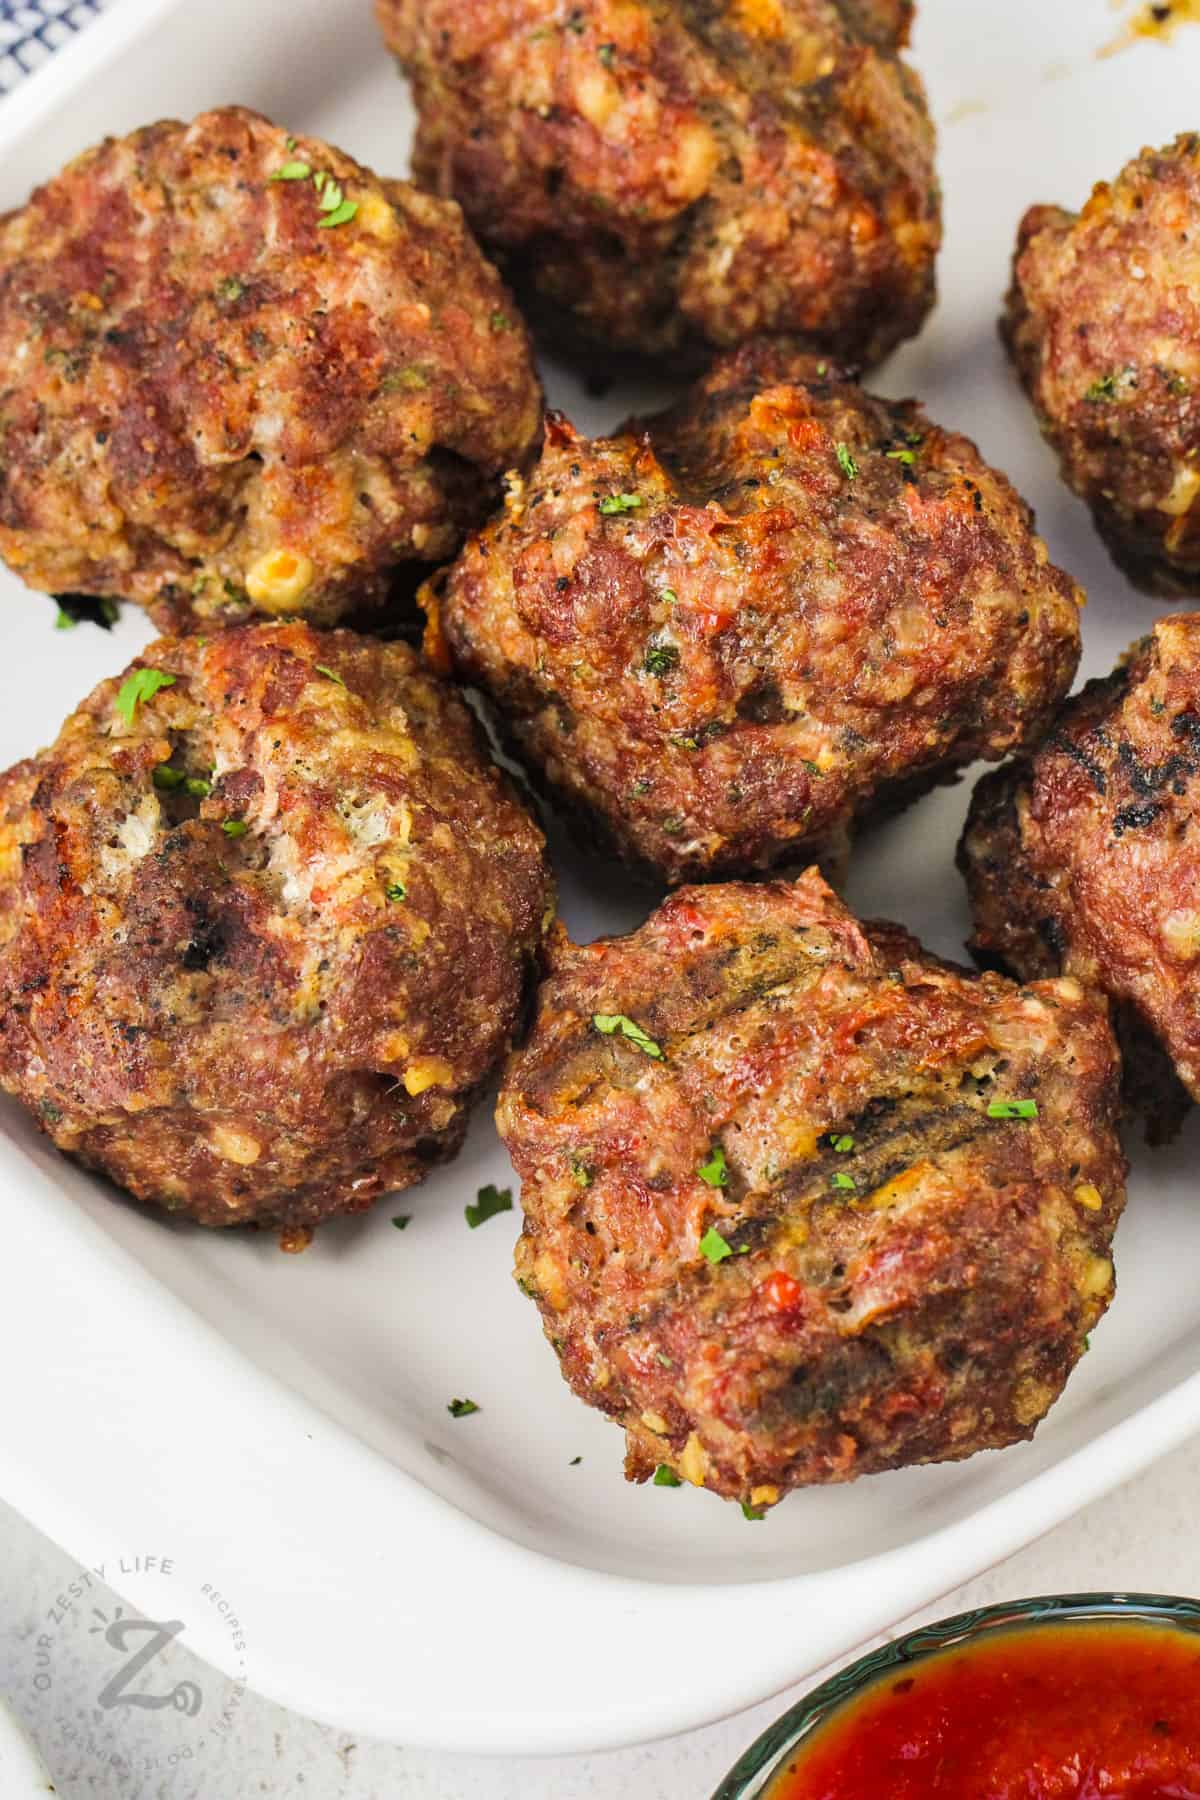 Smoked Meatballs cooked in a dish